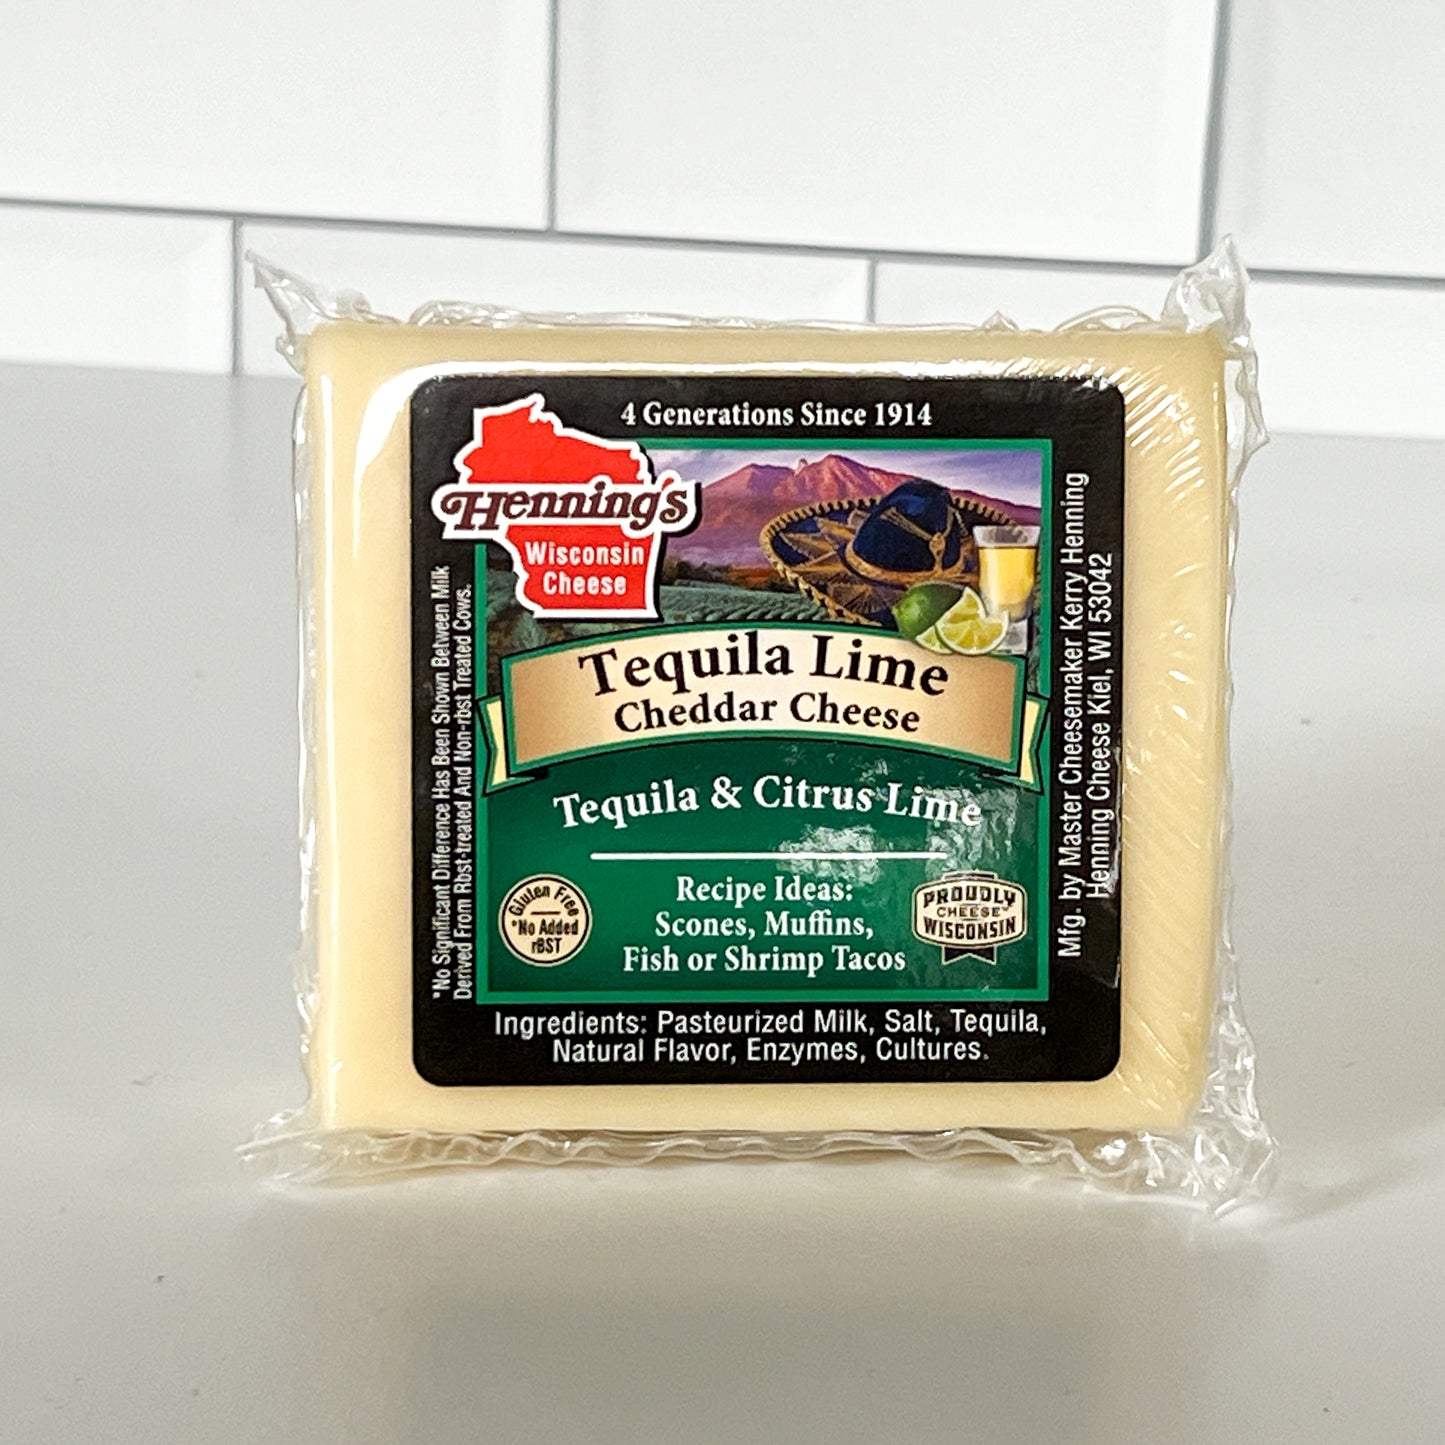 Tequila Lime Cheddar Cheese